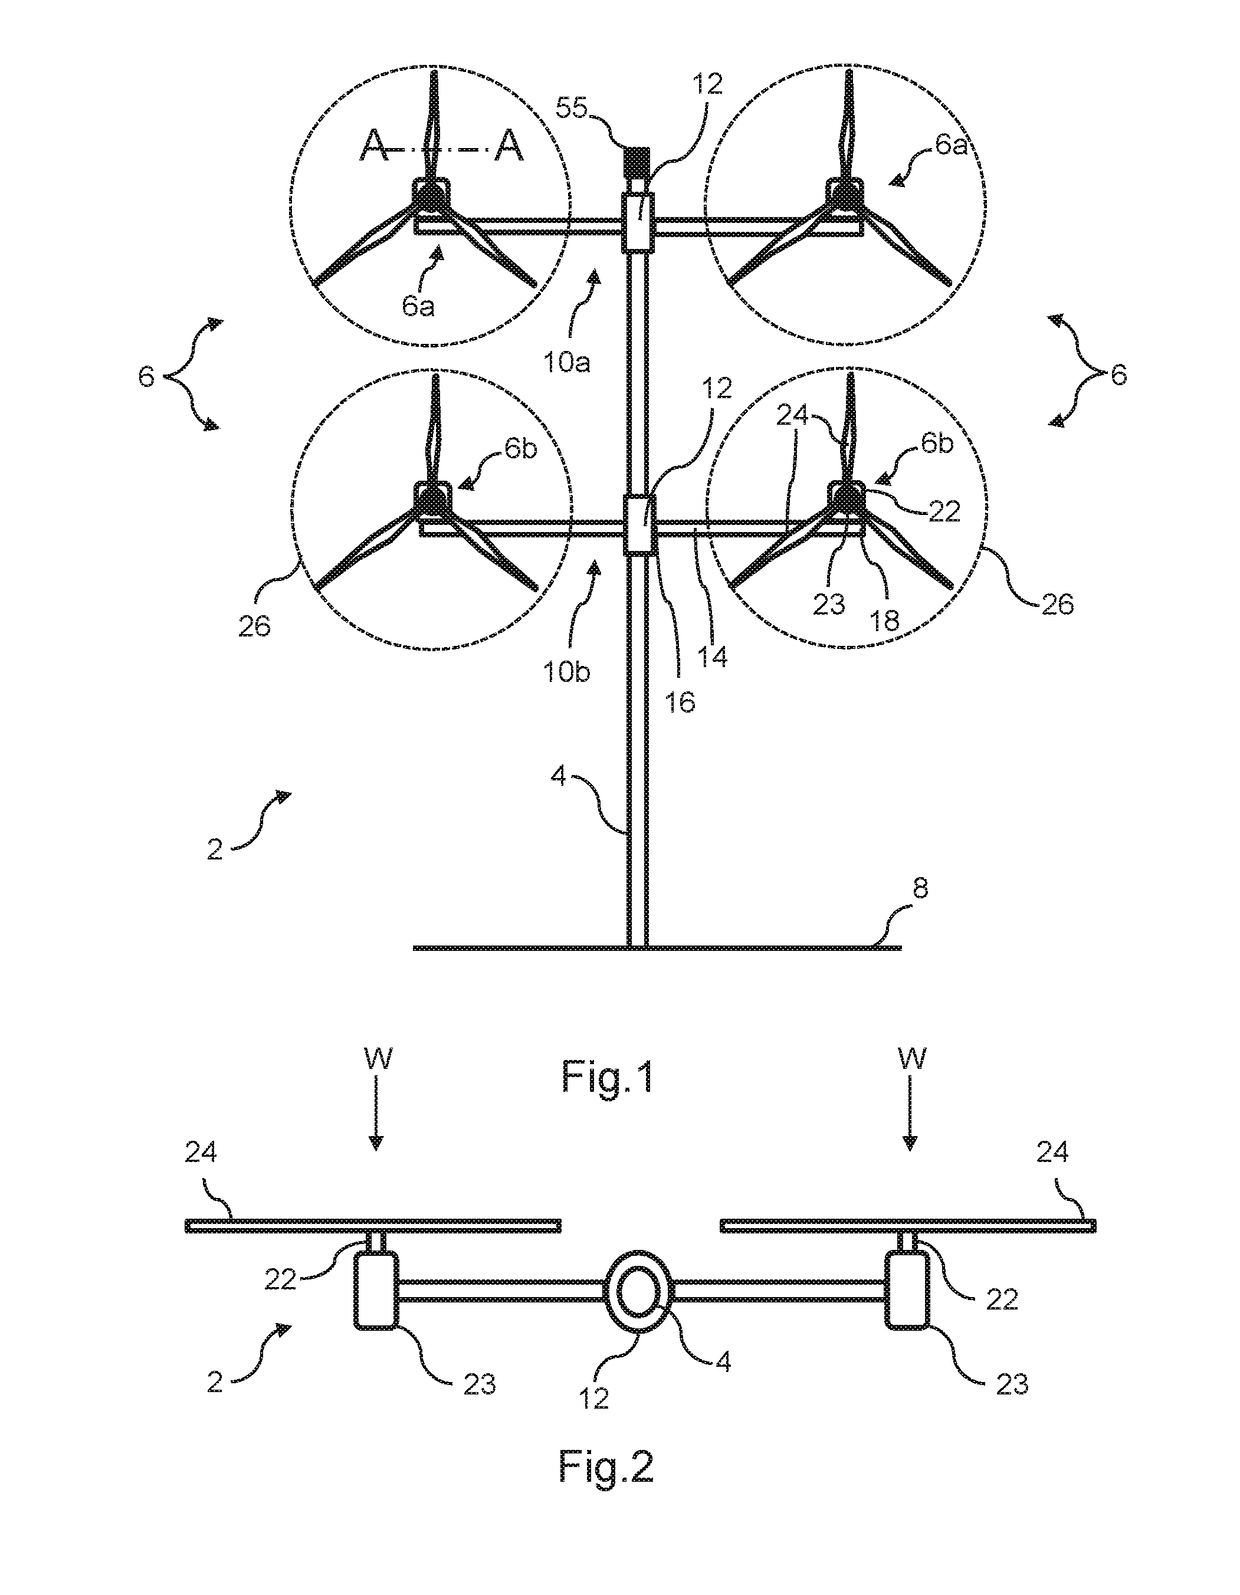 Control system and method for wind turbine having multiple rotors